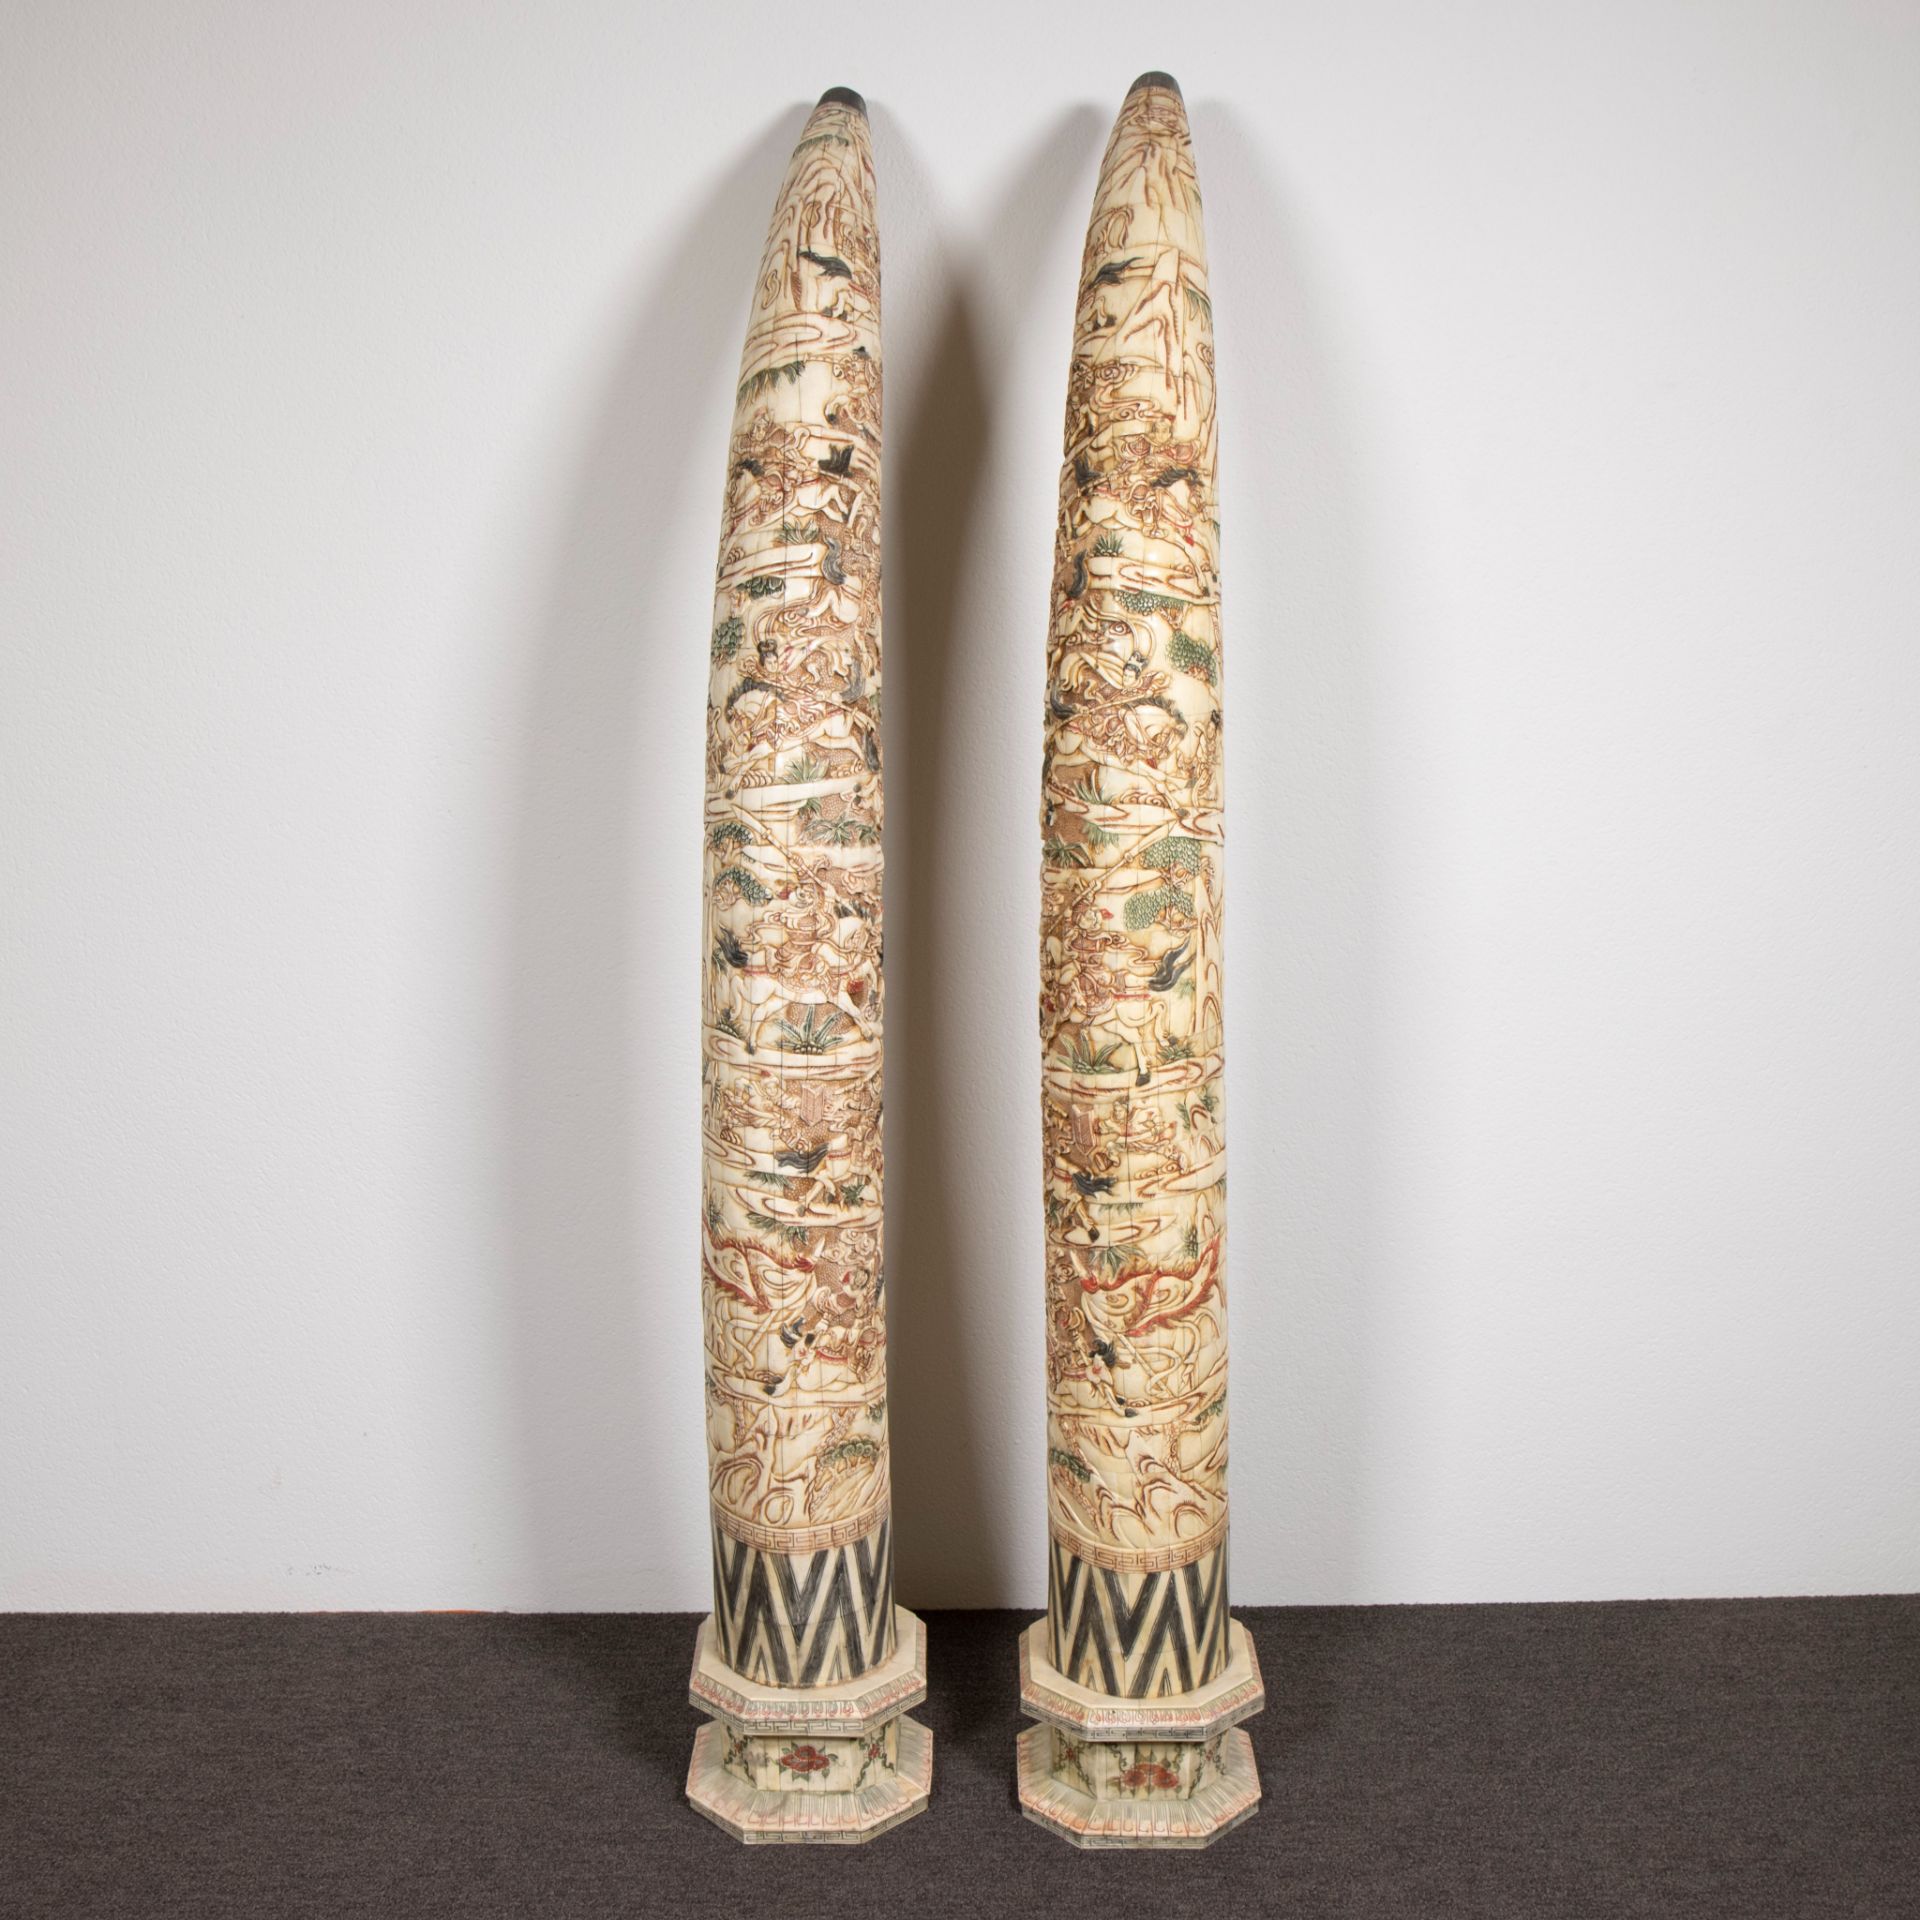 Exceptionally large pair of 'tusks' made of glued pieces of bone depicting battle scenes, circa 1890 - Image 2 of 4